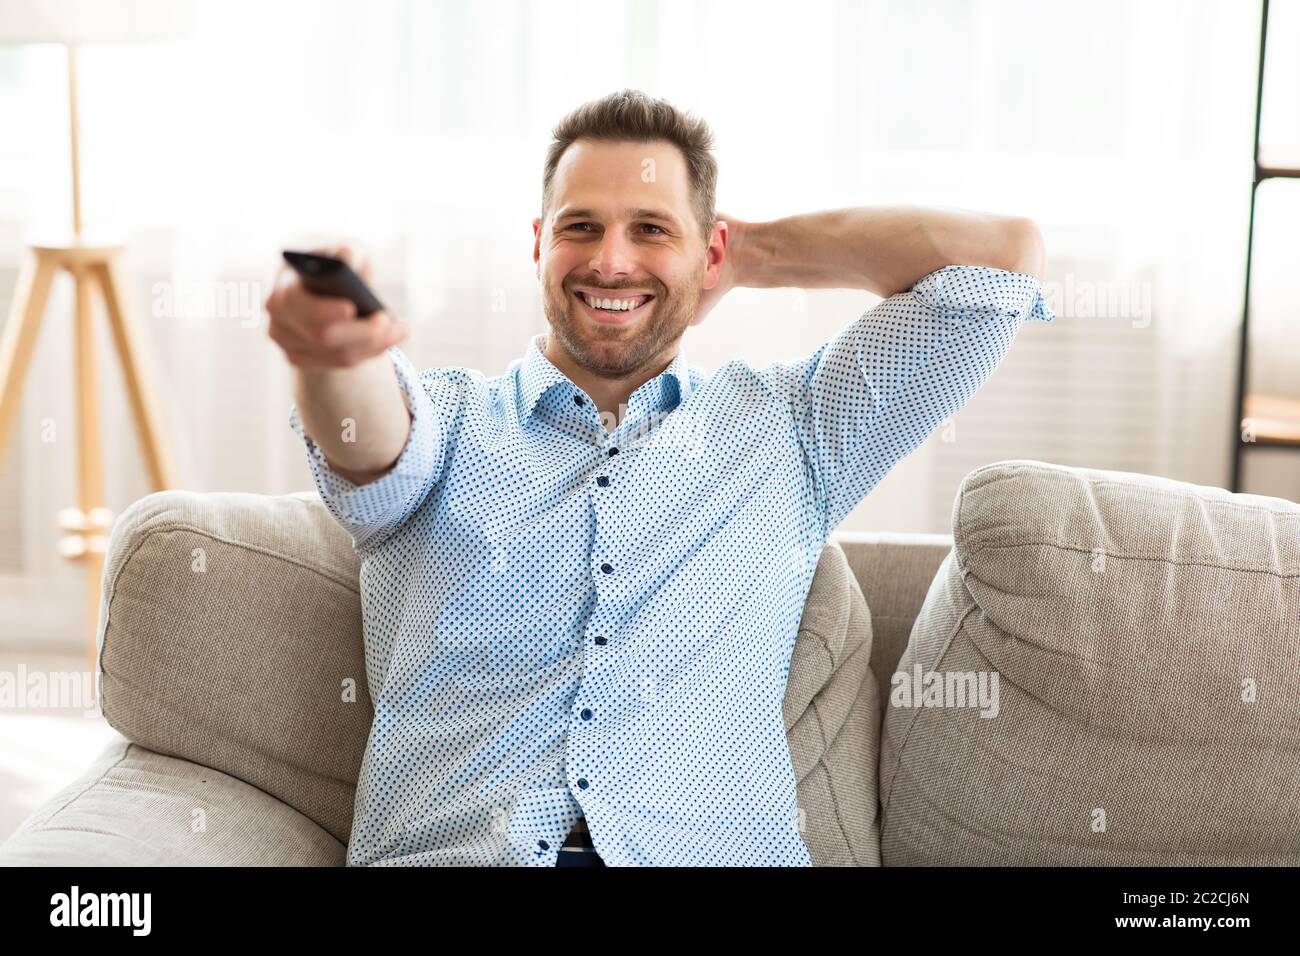 Happy guy watching TV at home, holding remote control Stock Photo